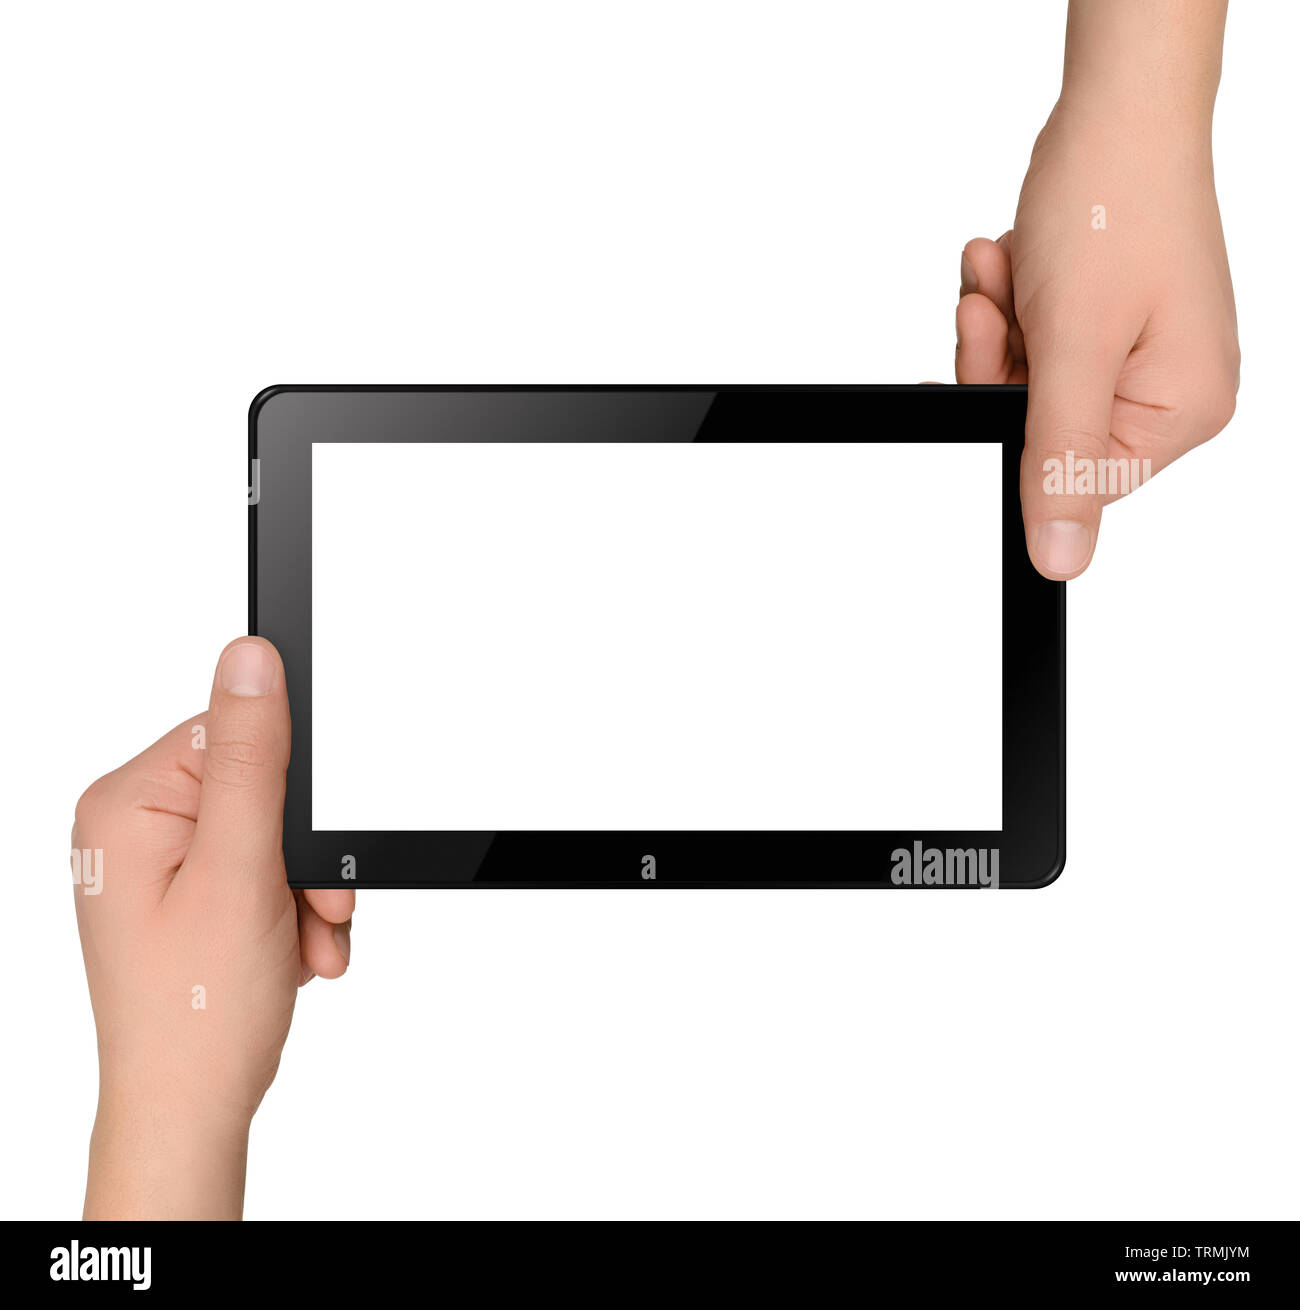 ROBLOX app seen on the screen of ipad which is in the hands of  unrecognisable child. Concept. Stafford, United Kingdom, May 18, 2021 Stock  Photo - Alamy